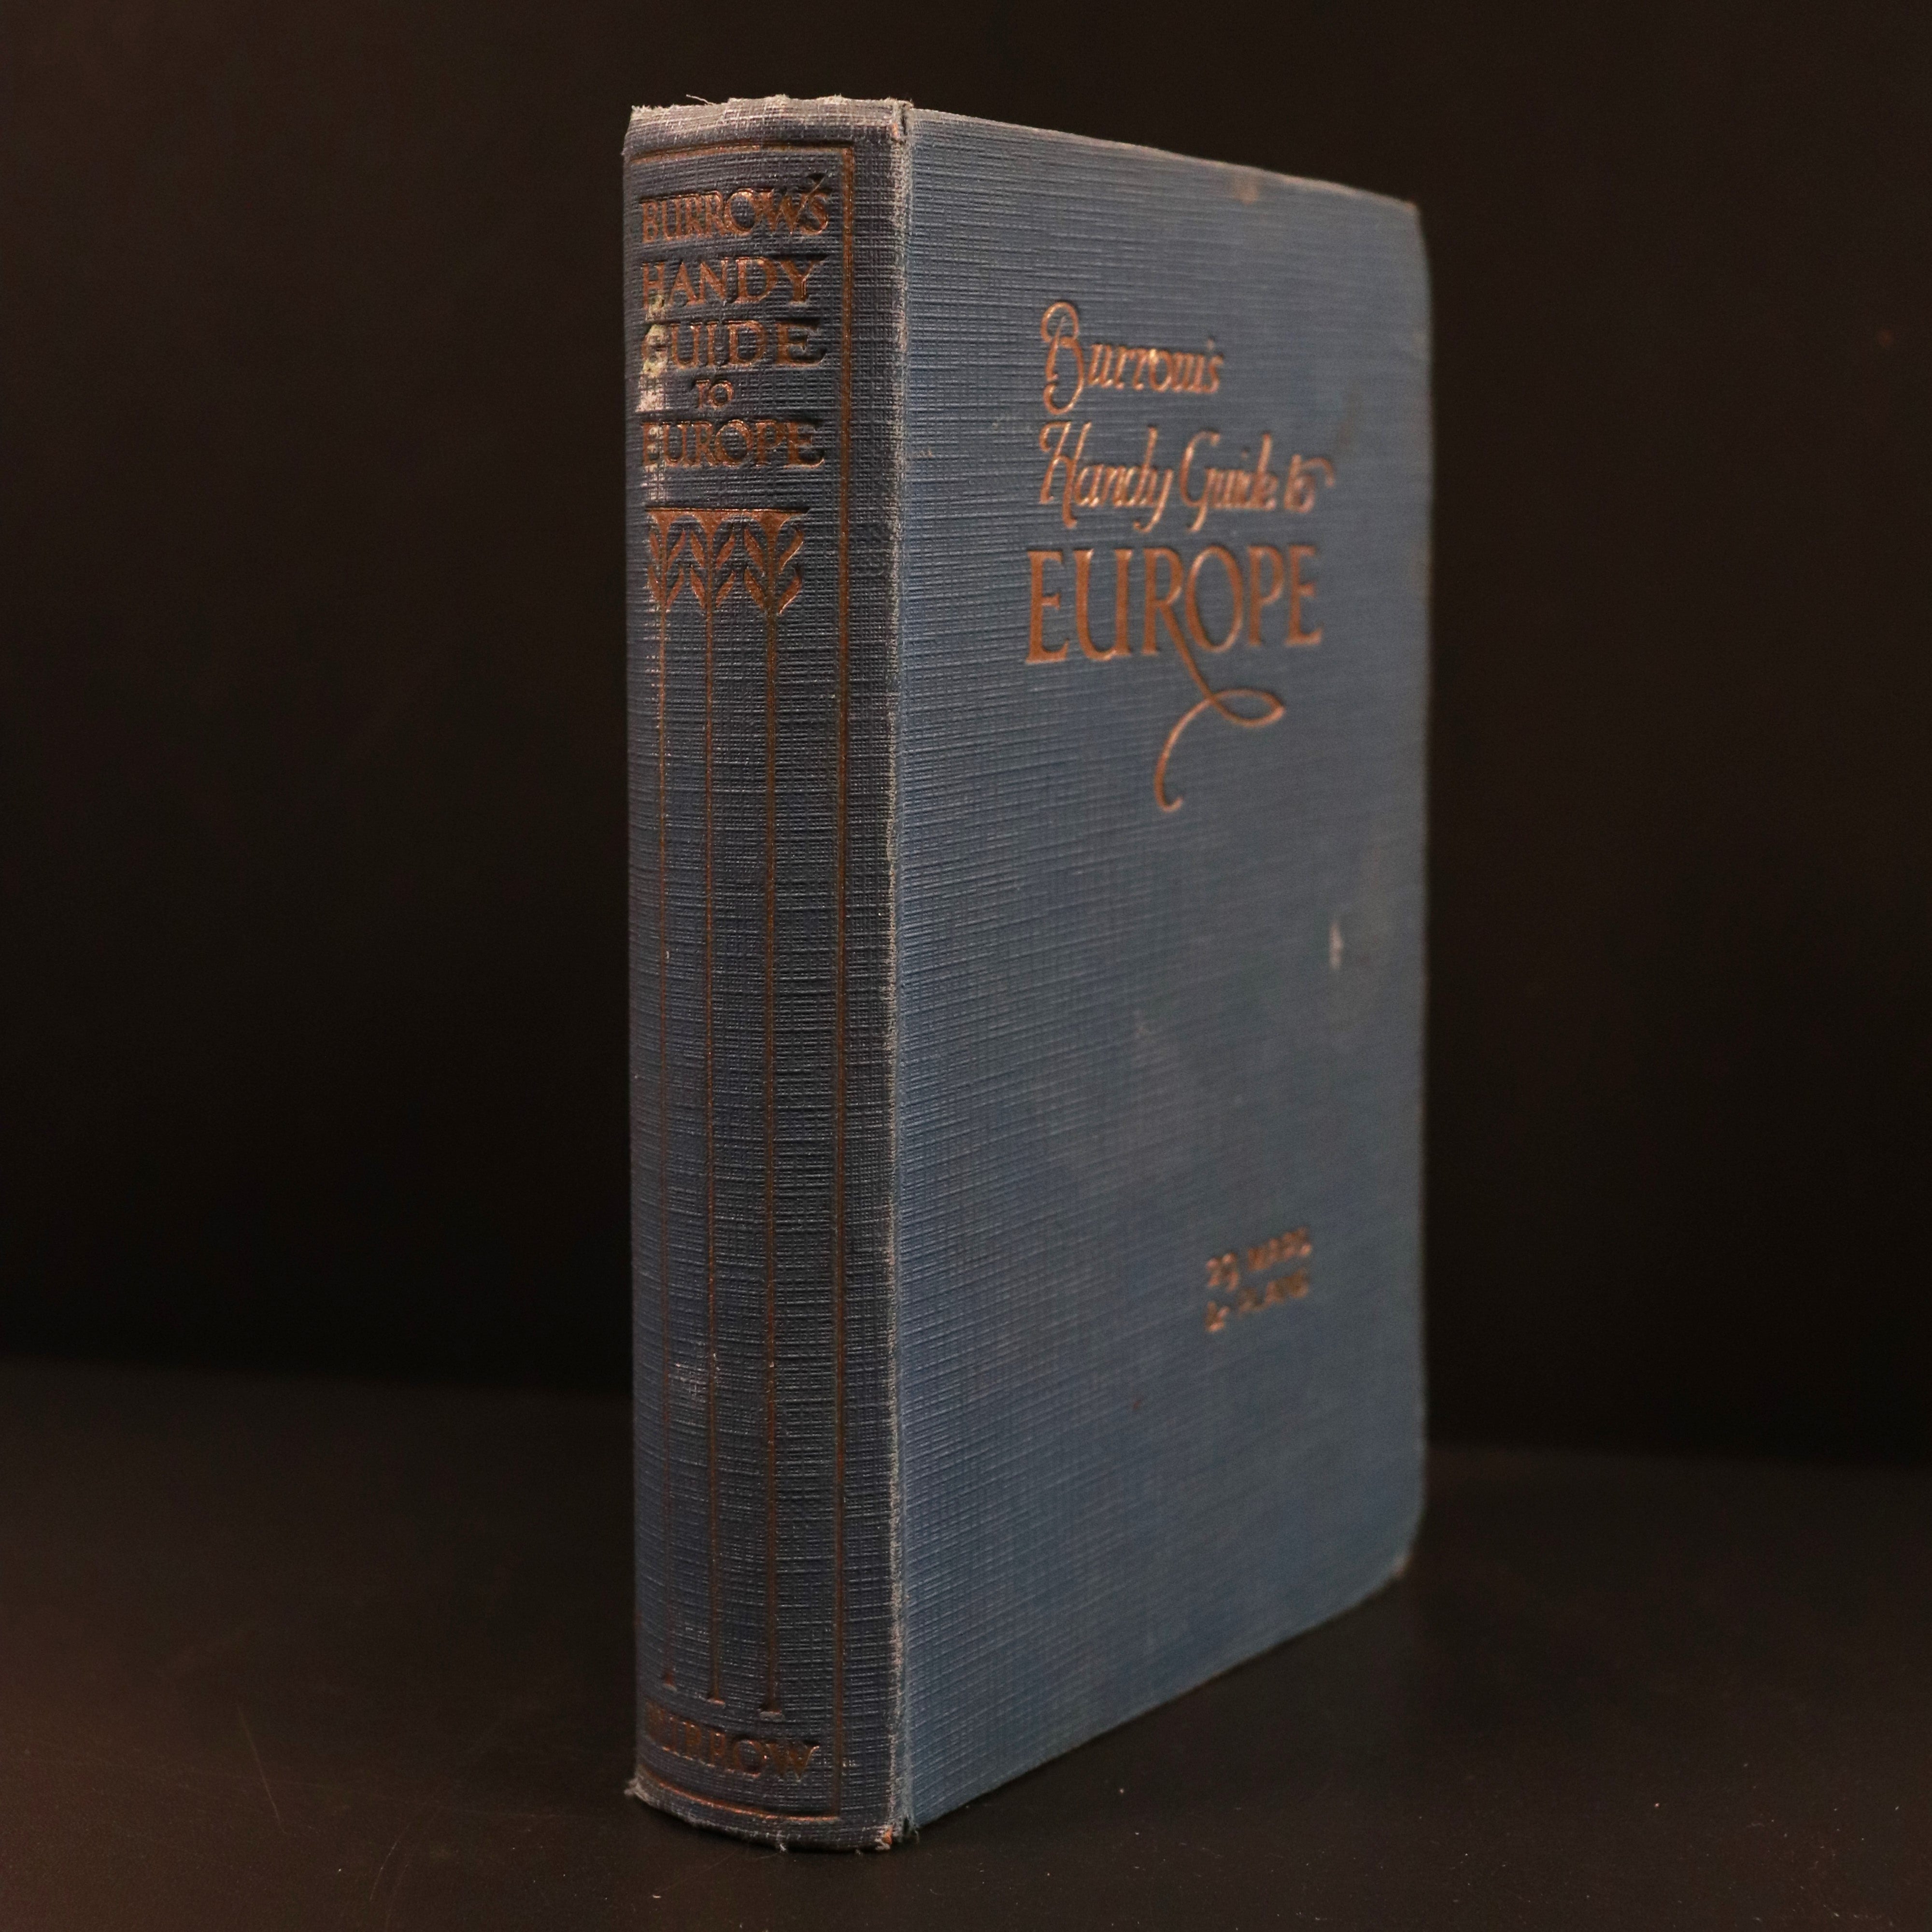 c1930 Burrow's Handy Guide To Europe Antique Travel Guide Book w/Maps